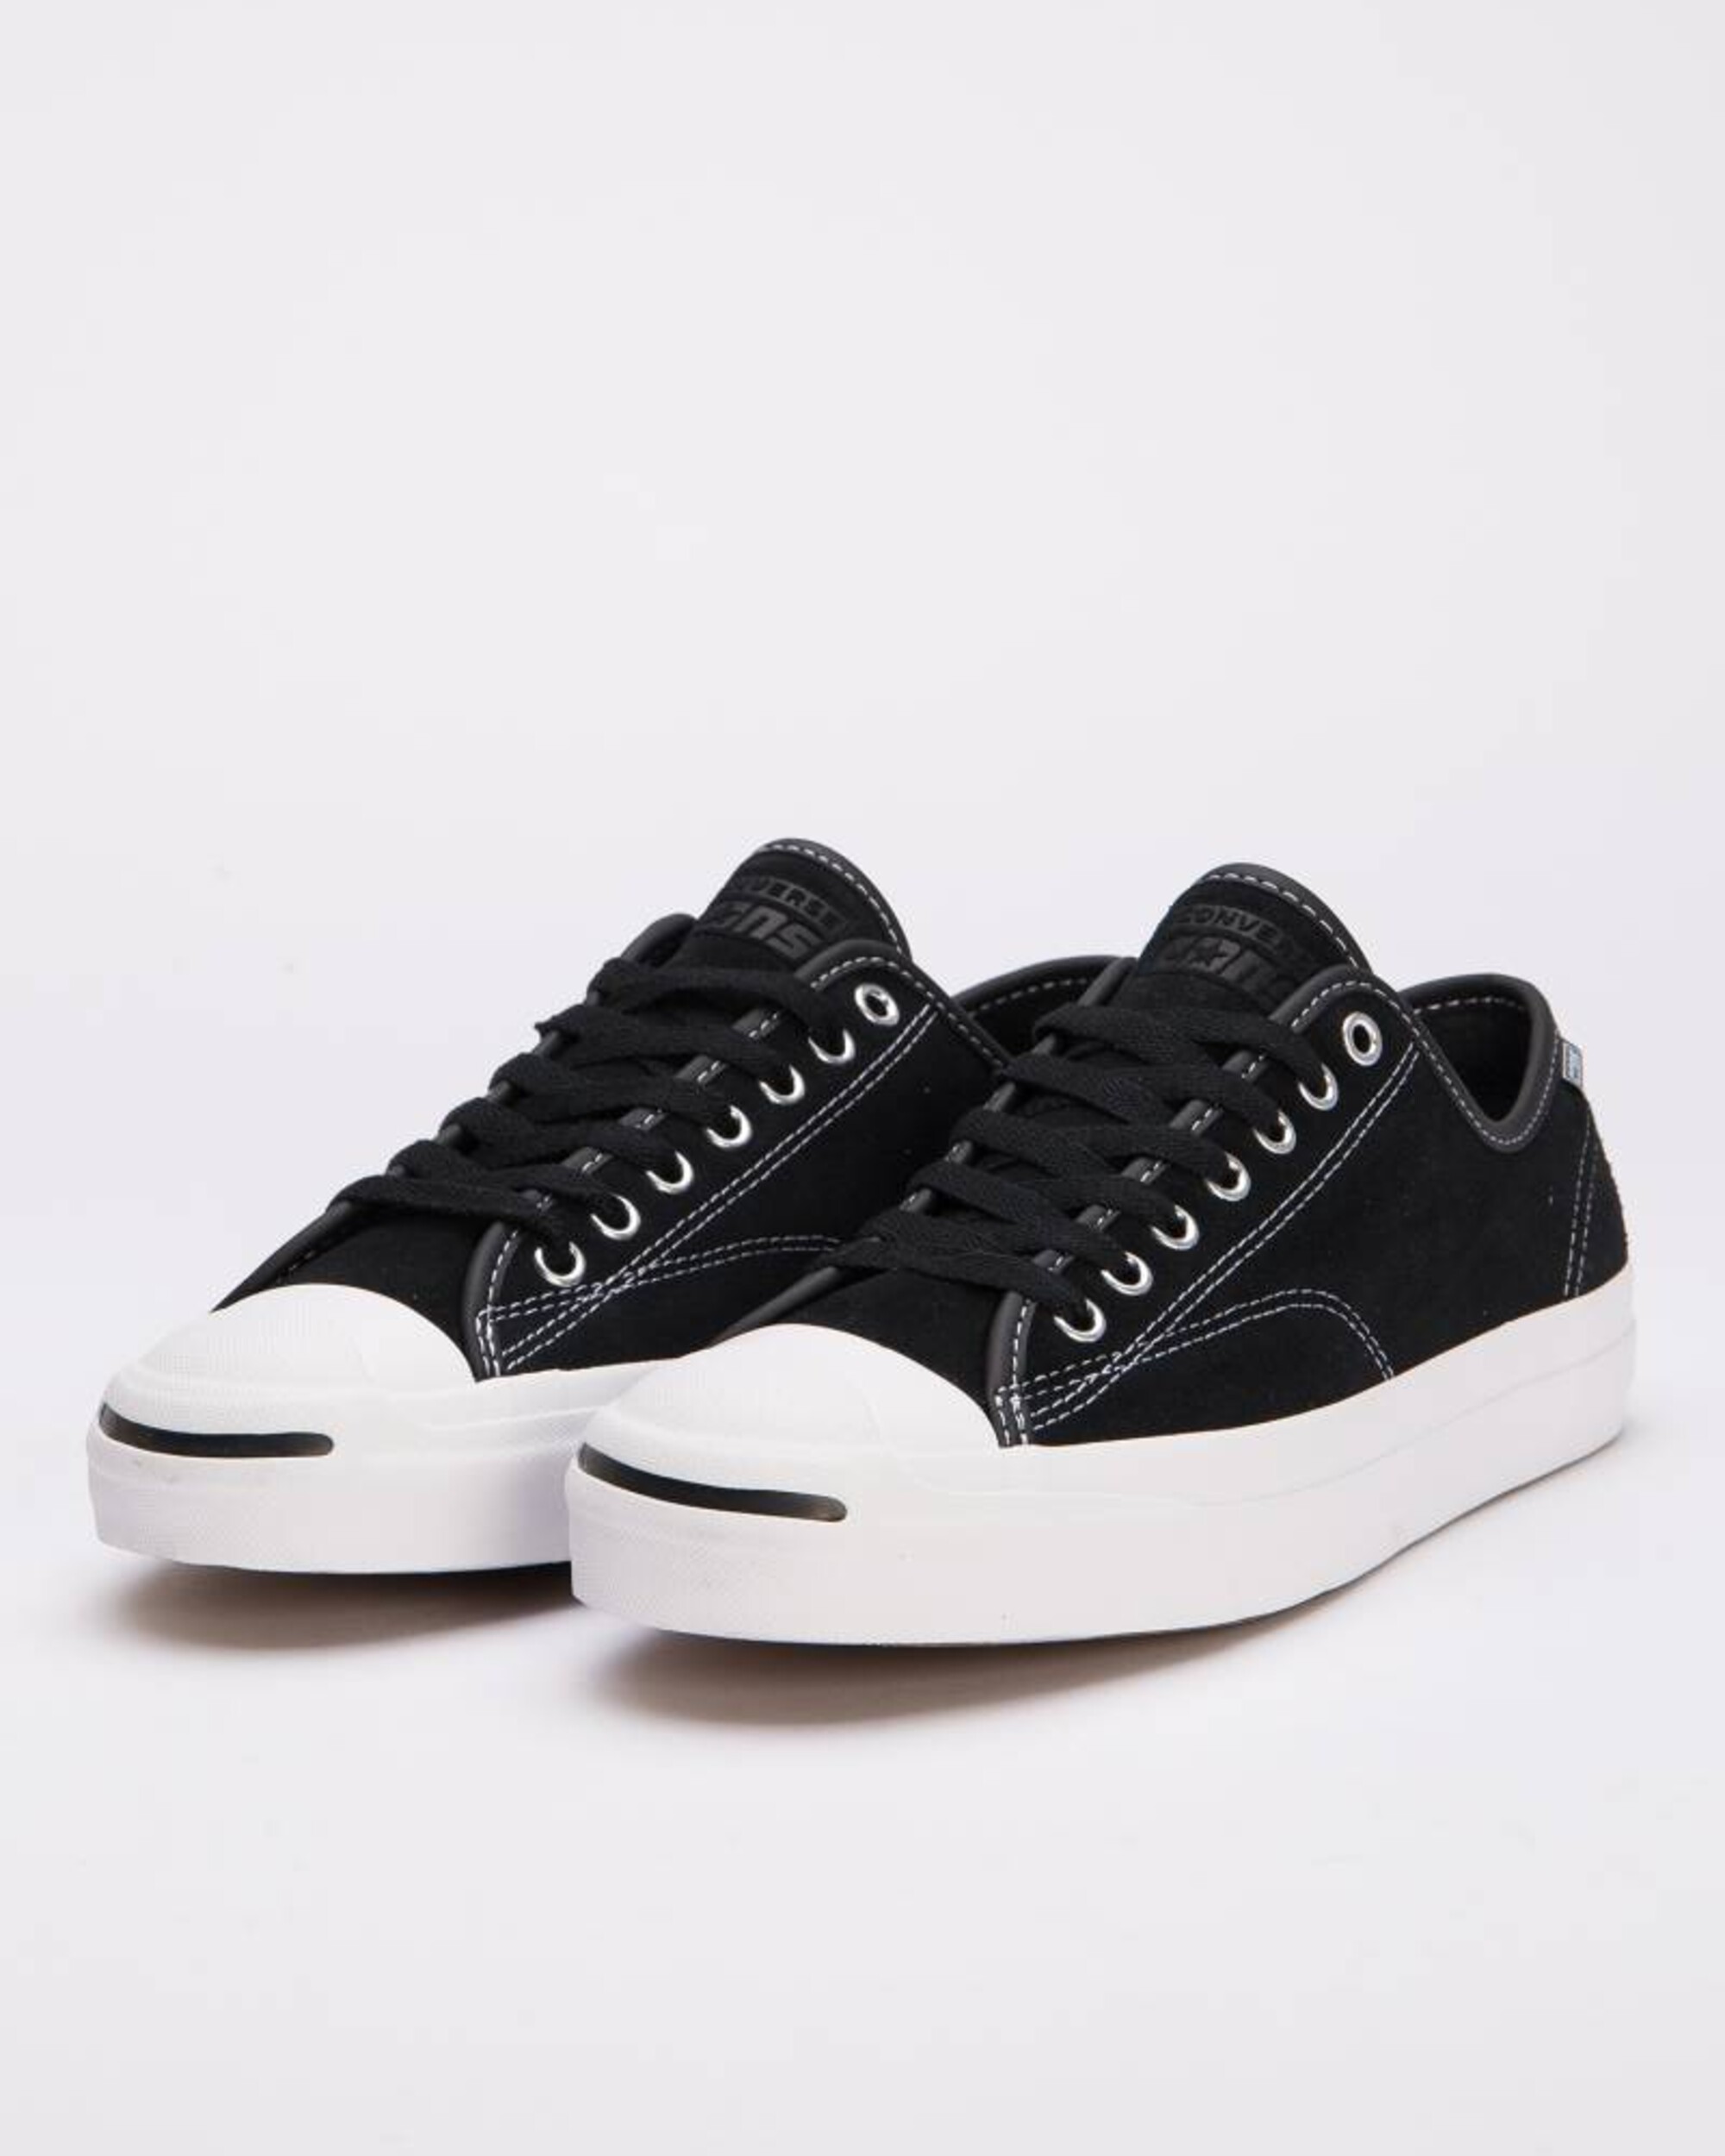 Converse Jack Purcell Pro OX Black/White